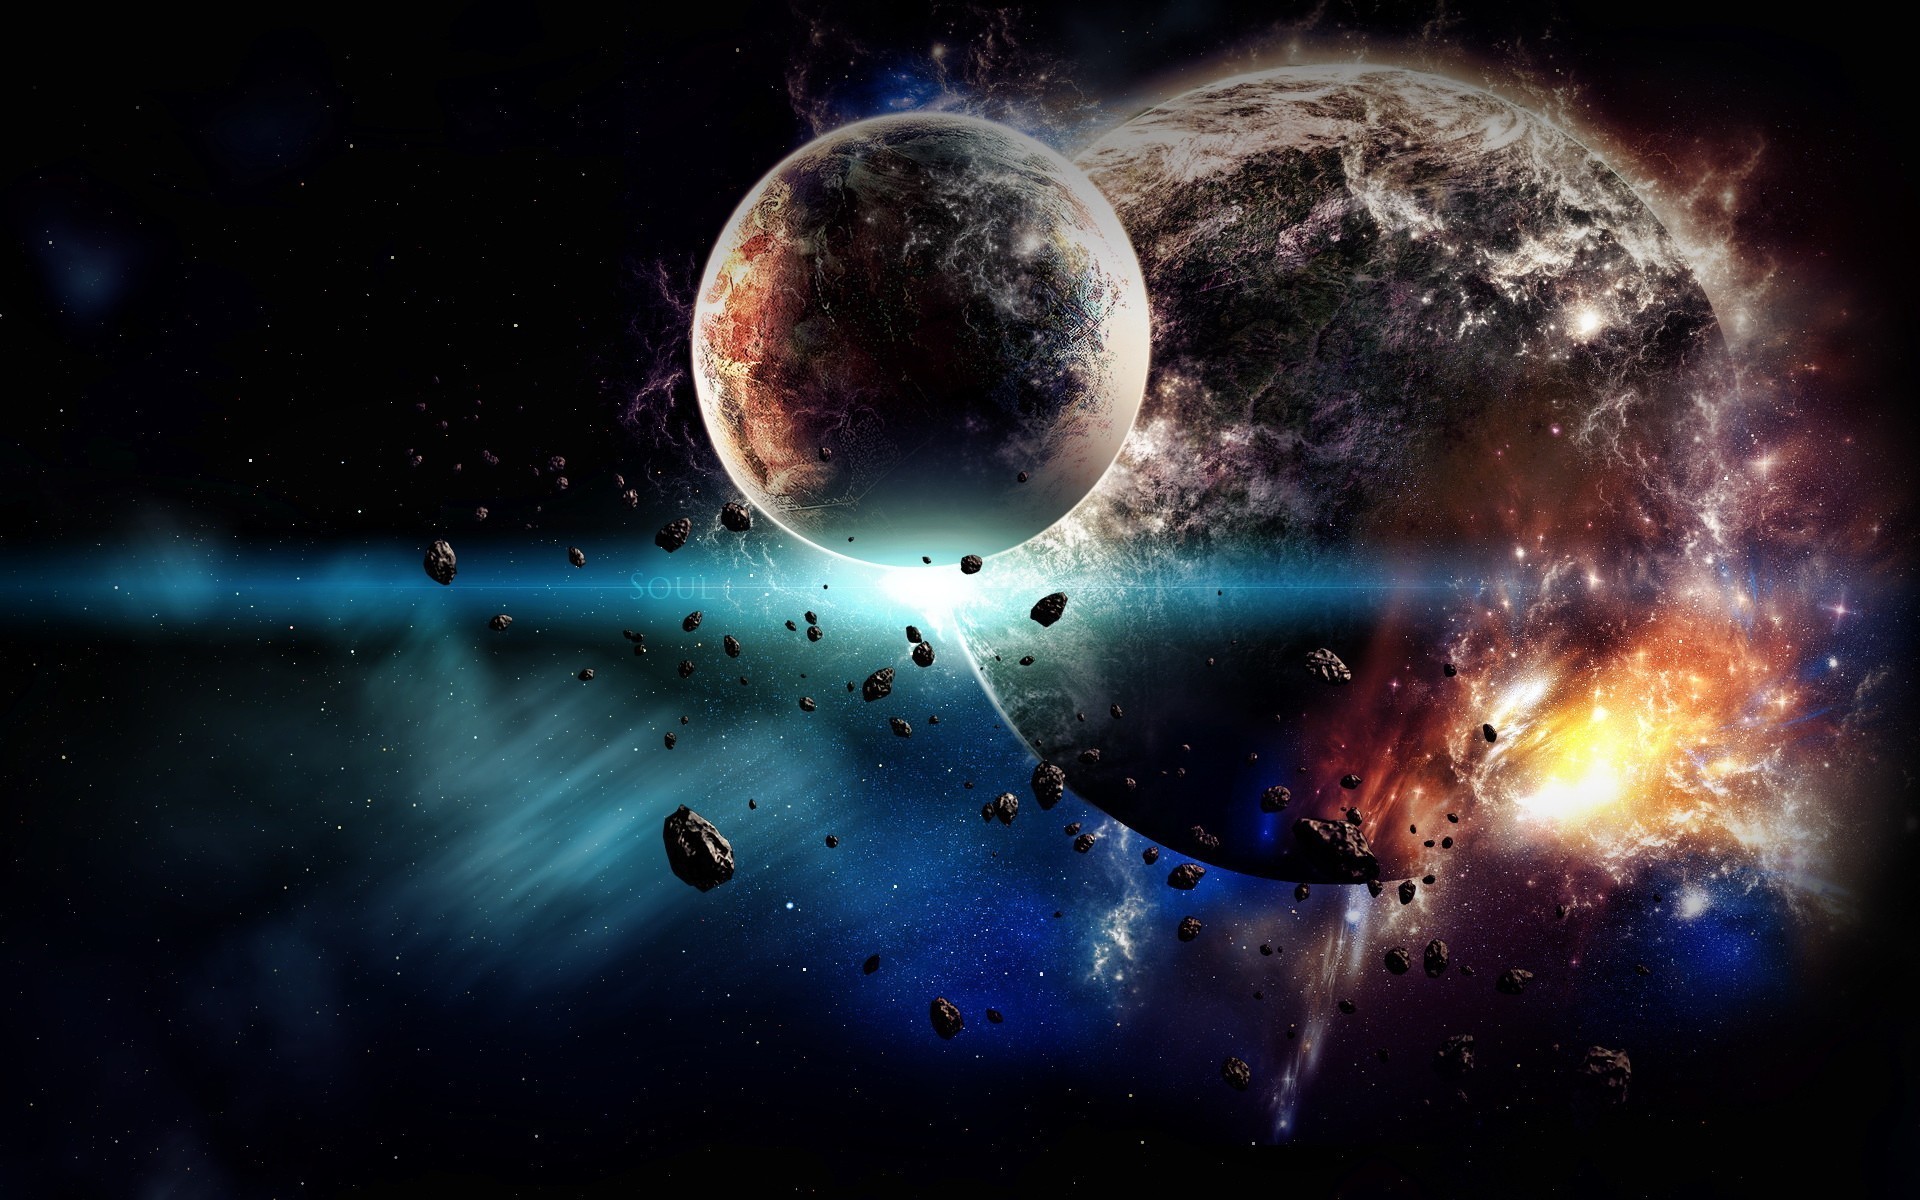 1920x1200 1920x1080 Download Space HD Picture Wallpaper Background space planets  takeoff explosion 96455 1920x1080